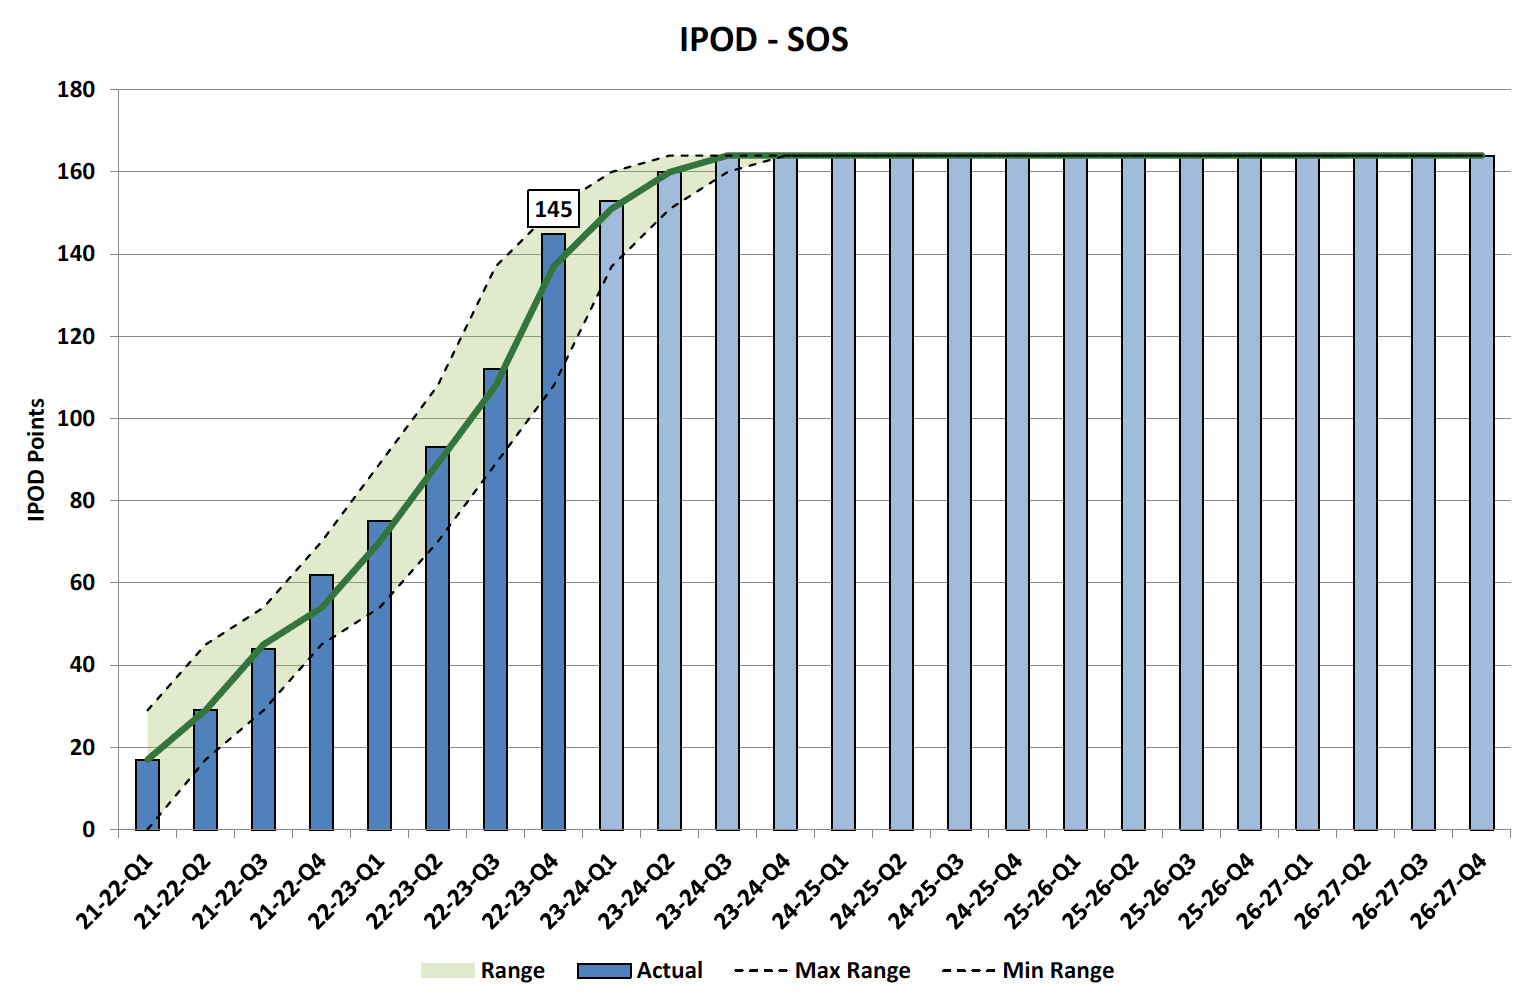 Chart showing IPOD points achieved or forecast for Start on Site milestone against target range for all projects on committed list